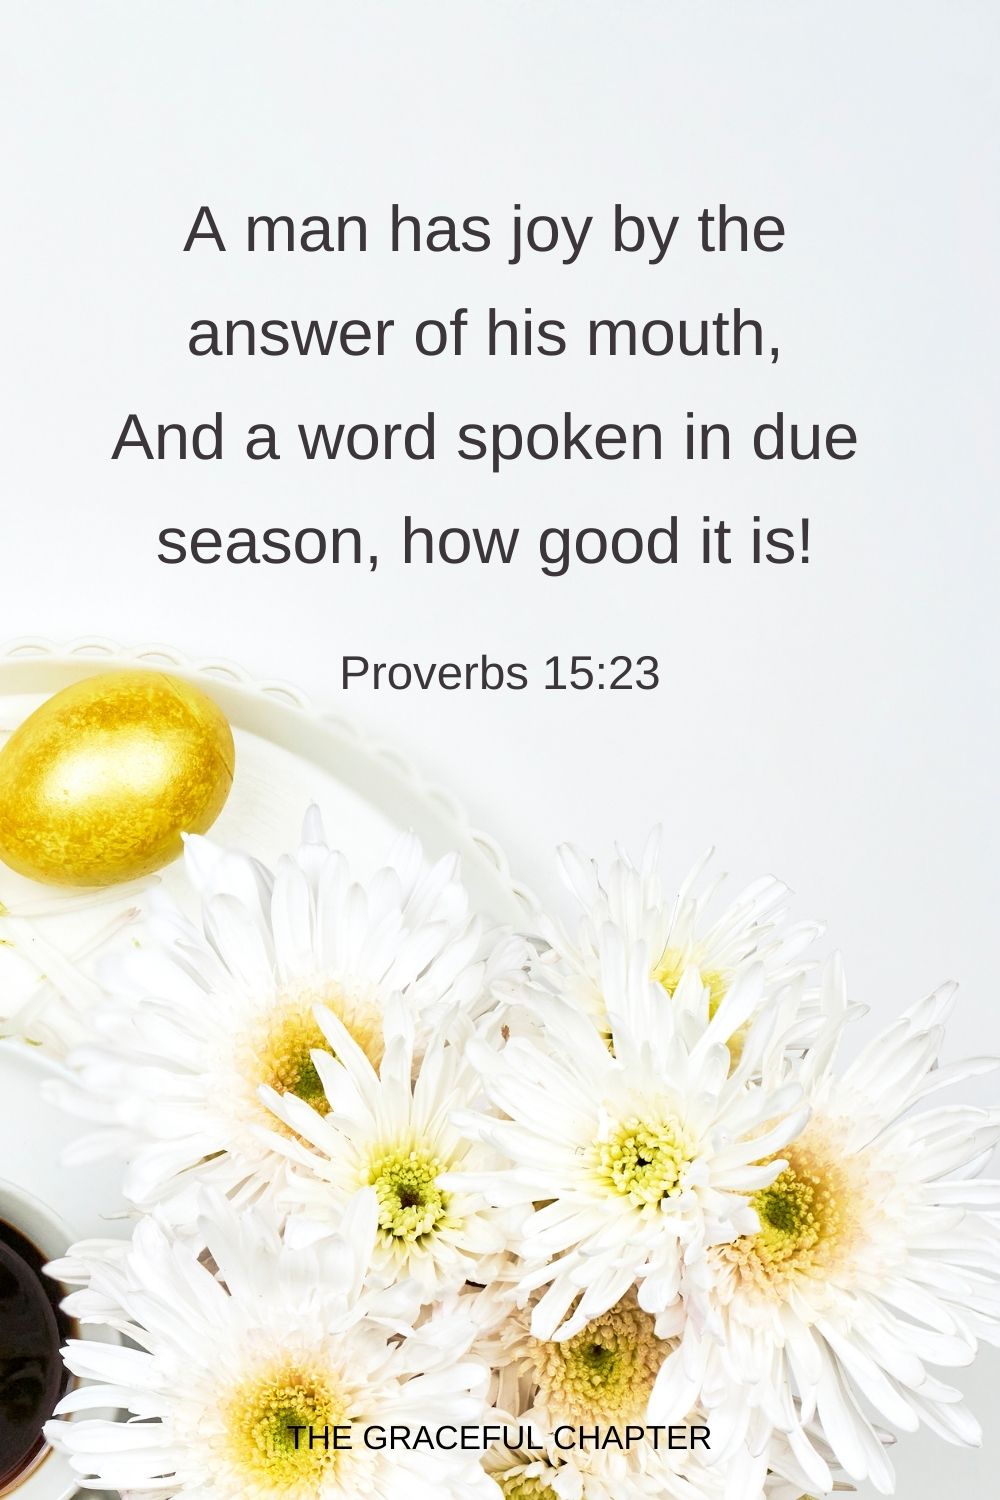 A man has joy by the answer of his mouth, And a word spoken in due season, how good it is! Proverbs 15:23